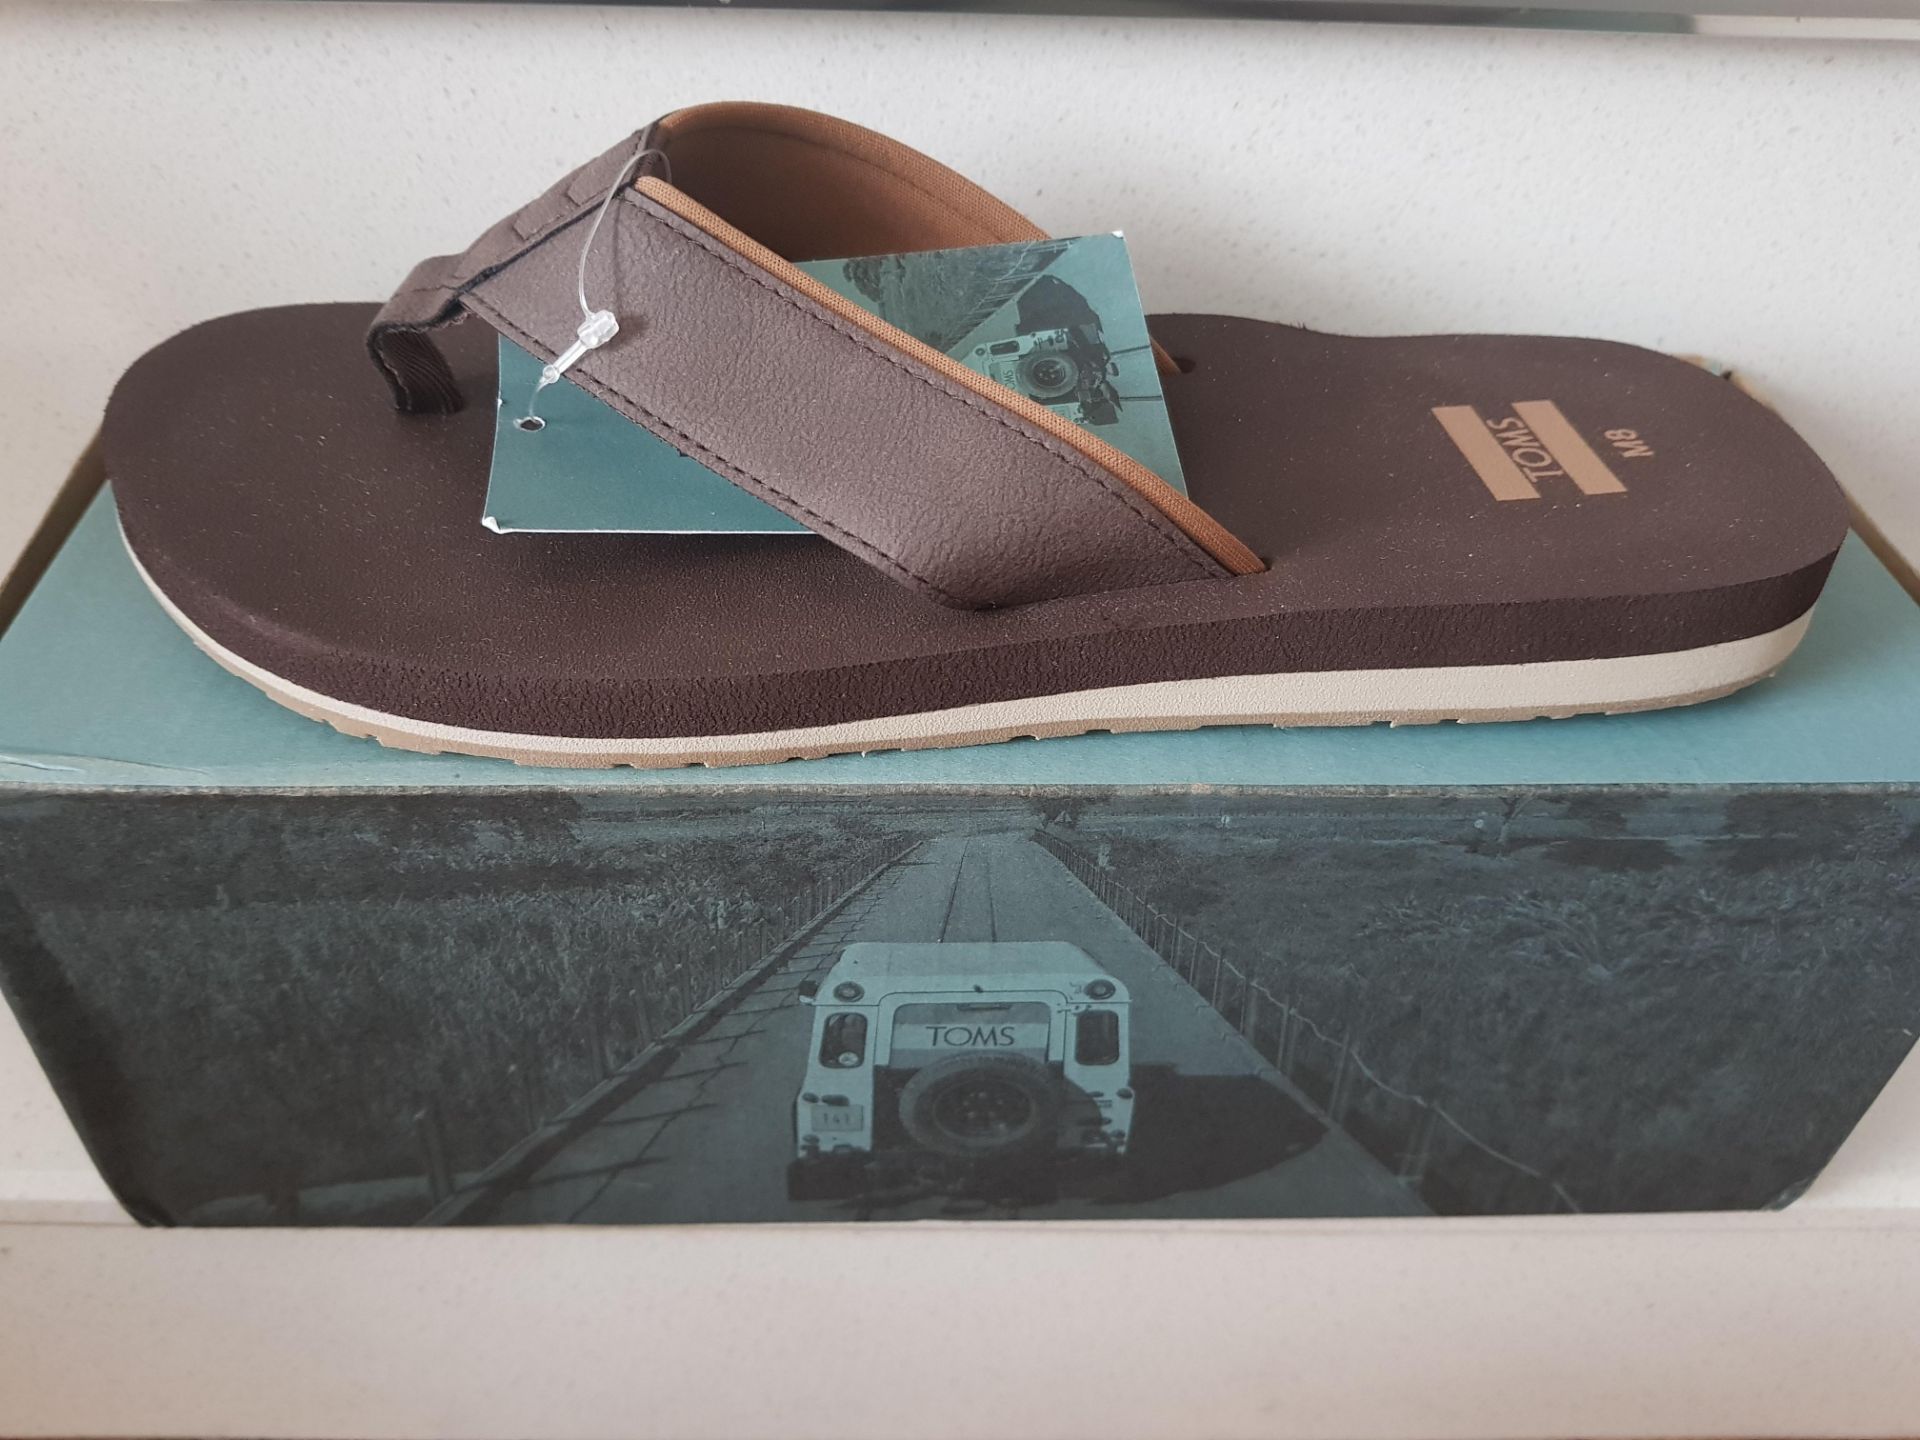 BRAND NEW TOMS FLIP FLOPS IN BROWN SIZE 8 RRP £30Condition ReportAppraisal Available on Request- All